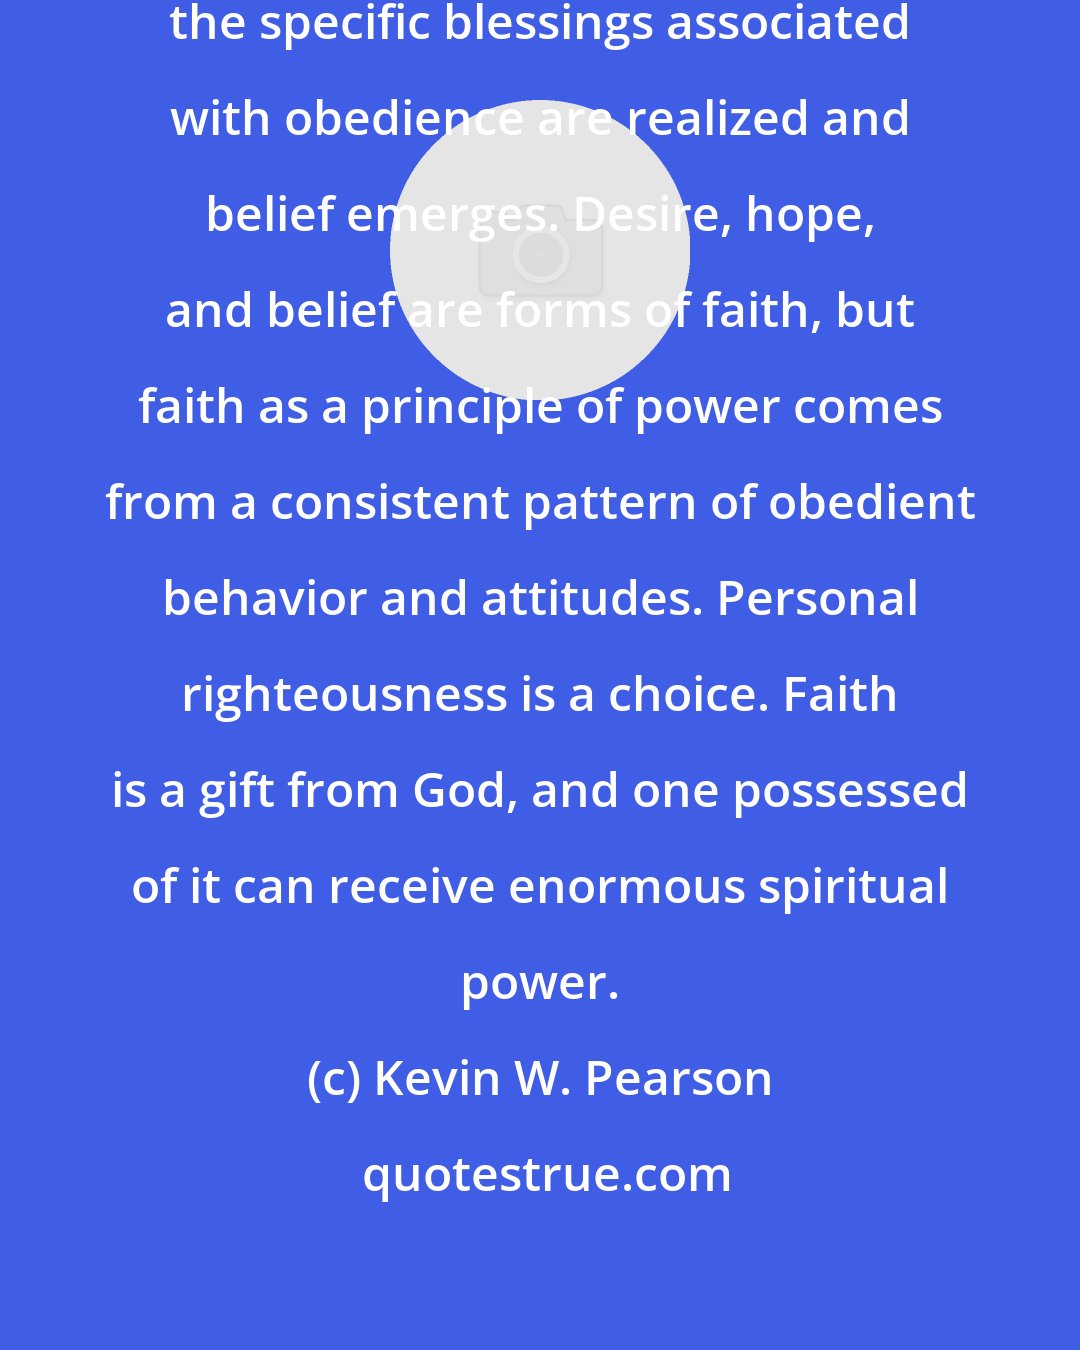 Kevin W. Pearson: As patterns of obedience develop, the specific blessings associated with obedience are realized and belief emerges. Desire, hope, and belief are forms of faith, but faith as a principle of power comes from a consistent pattern of obedient behavior and attitudes. Personal righteousness is a choice. Faith is a gift from God, and one possessed of it can receive enormous spiritual power.